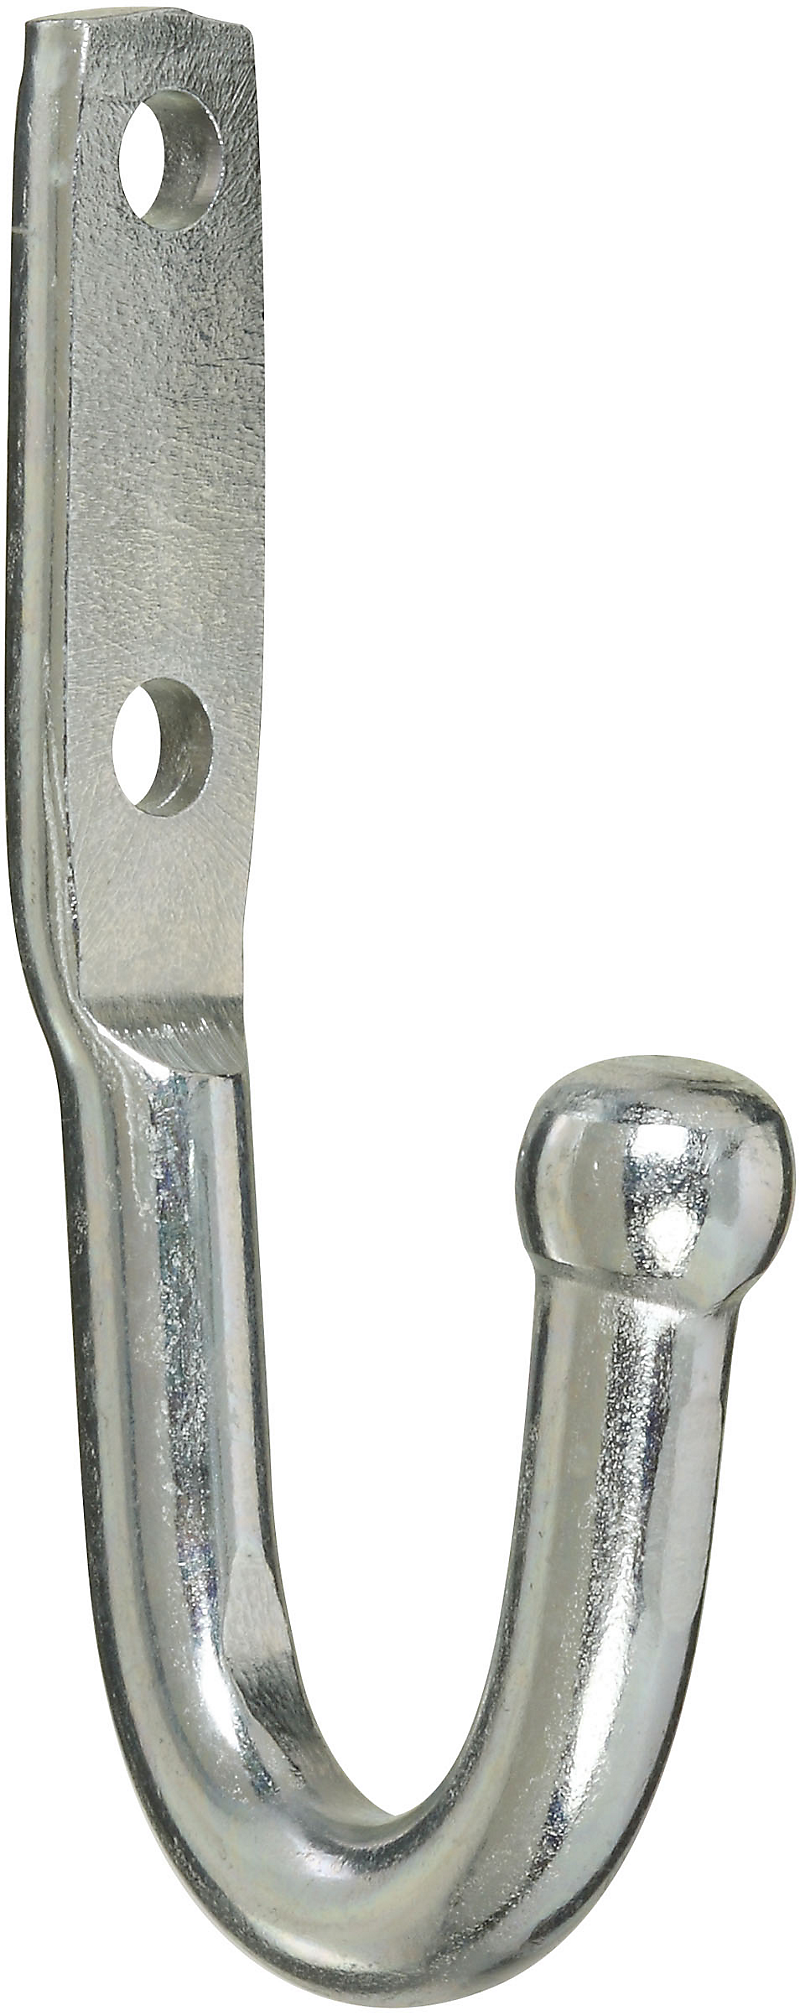 Primary Product Image for Tarp/Rope Hook